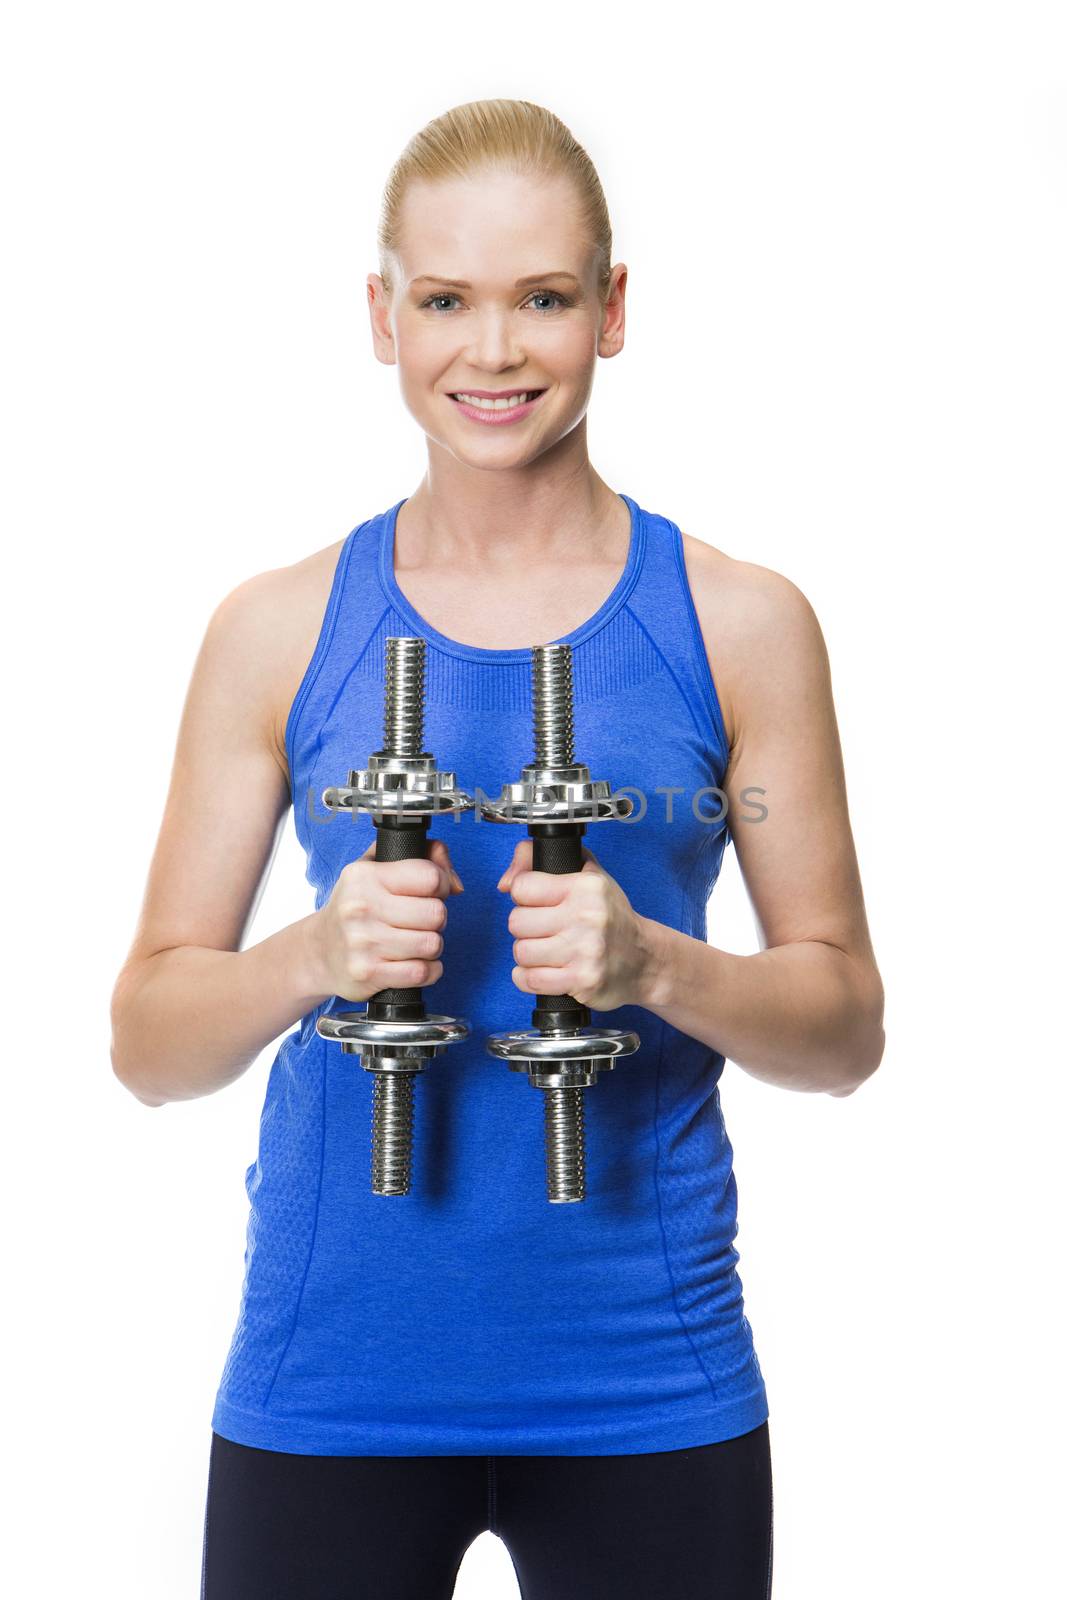 blonde woman wearing fitness clothing exercising with weights